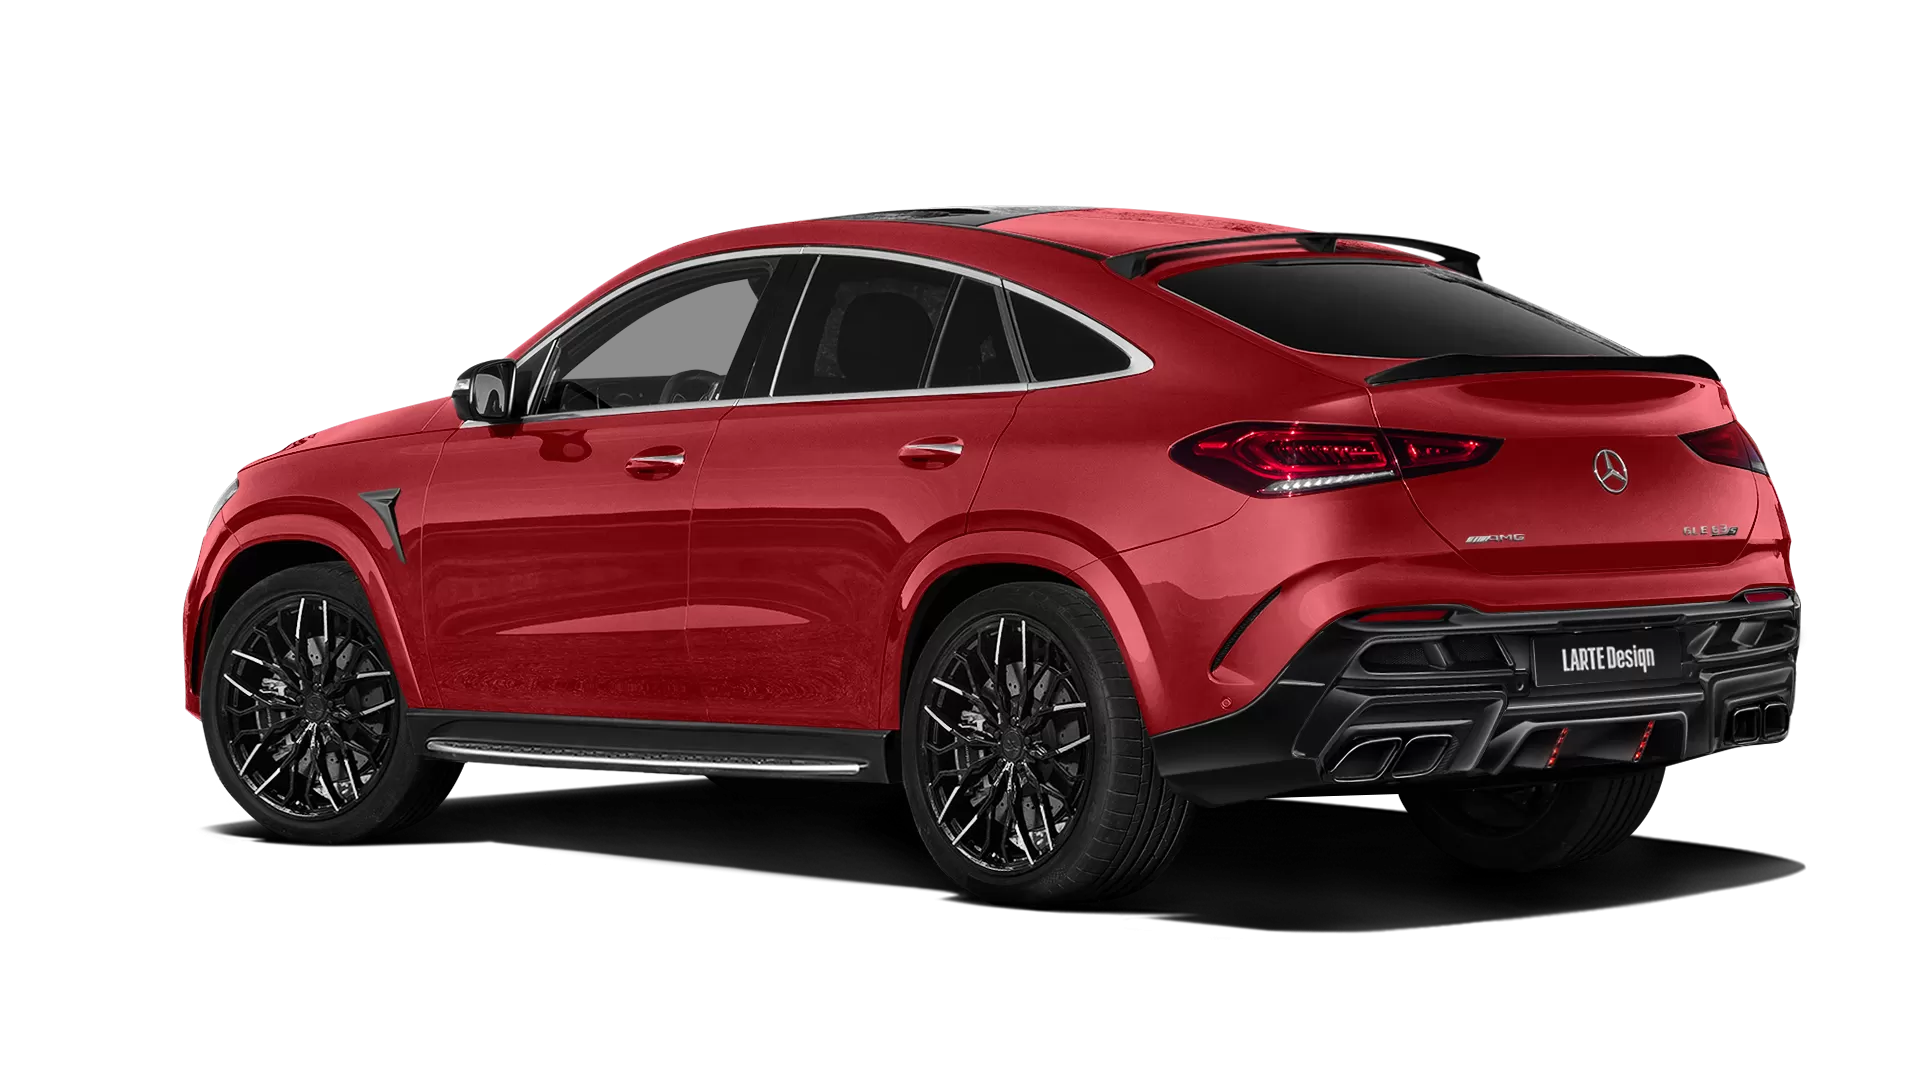 Mercedes GLE Coupe AMG 63 C167 with painted body kit: rear view shown in Hyacinthe Red